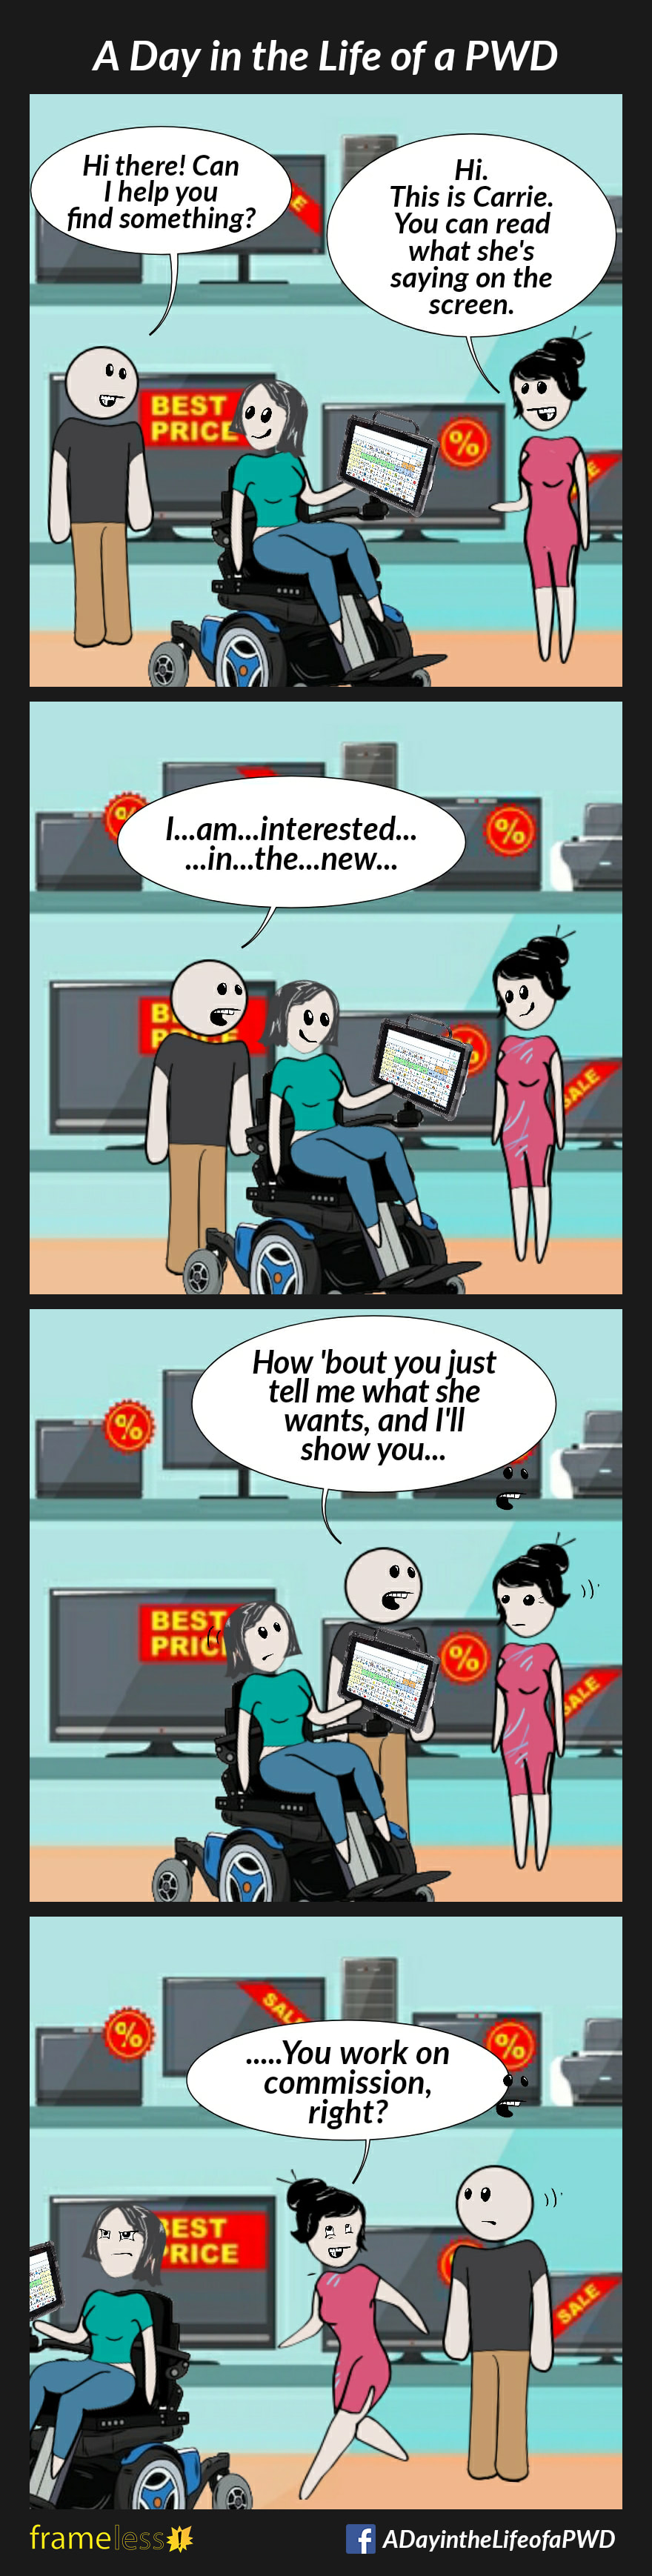 COMIC STRIP 
A Day in the Life of a PWD (Person With a Disability) 

Frame 1:
A woman using a power wheelchair and an AAC device is with her carer in an electronics store.
CLERK: Hi there! Can I help you find something?
CARER: Hi. This is Carrie. You can read what she is saying on the screen.

Frame 2:
Carrie turns to her AAC device.
CLERK (reading): I...am...interested...in..
...the...new...

Frame 3:
The clerk stops and turns to the carer.
CLERK: How 'bout you just tell me what she wants and I'll show you...

Frame 4:
Irritated, Carrie turns and leaves.
Her carer rollows.
CARER (to clerk): ...You work on commission, right?